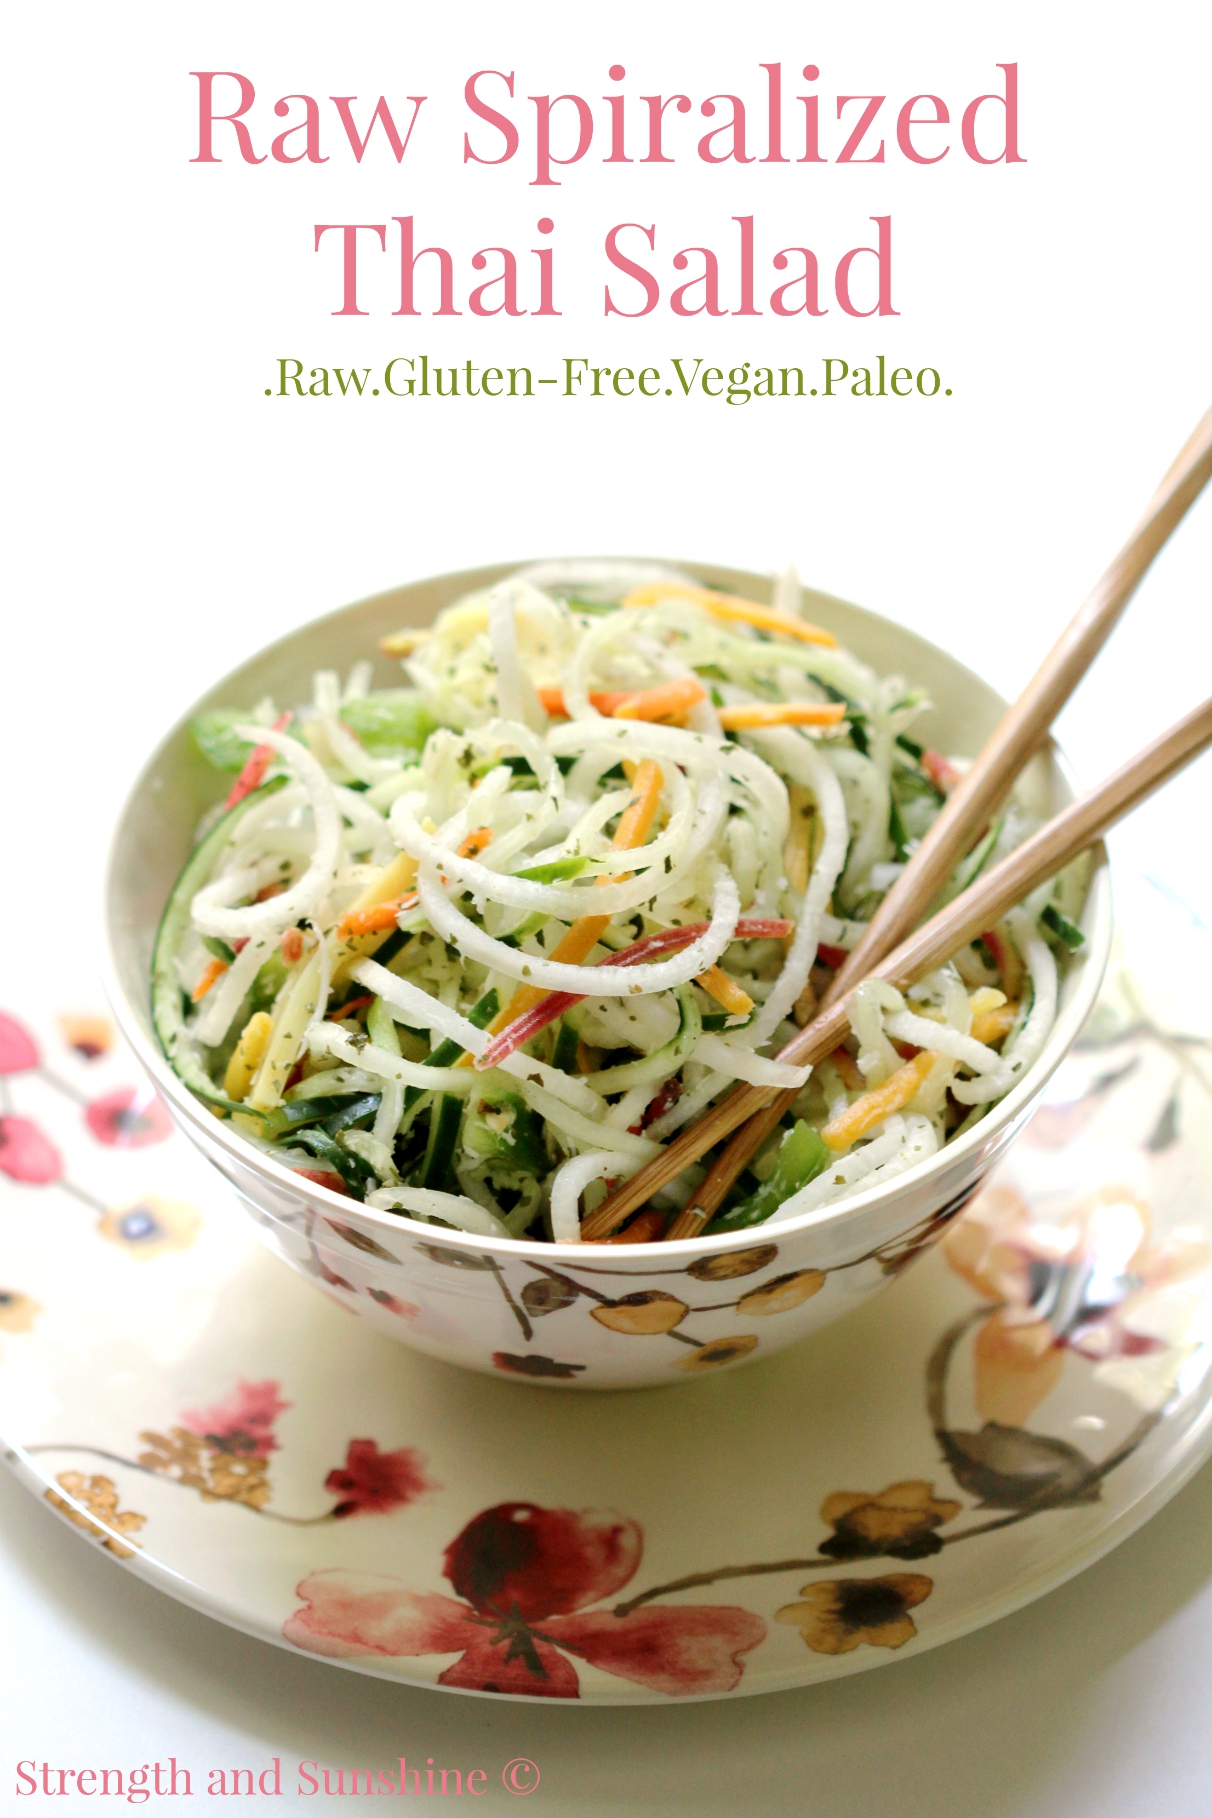 Raw Spiralized Thai Salad | Strength and Sunshine @RebeccaGF666 Who ever said veggies were boring? This Spiralized Thai Salad is all veggie, all raw, and exploding with flavor! If you aren't a veggie lover yet, you will be after tasting this gluten-free, paleo, and vegan spiralized salad recipe!